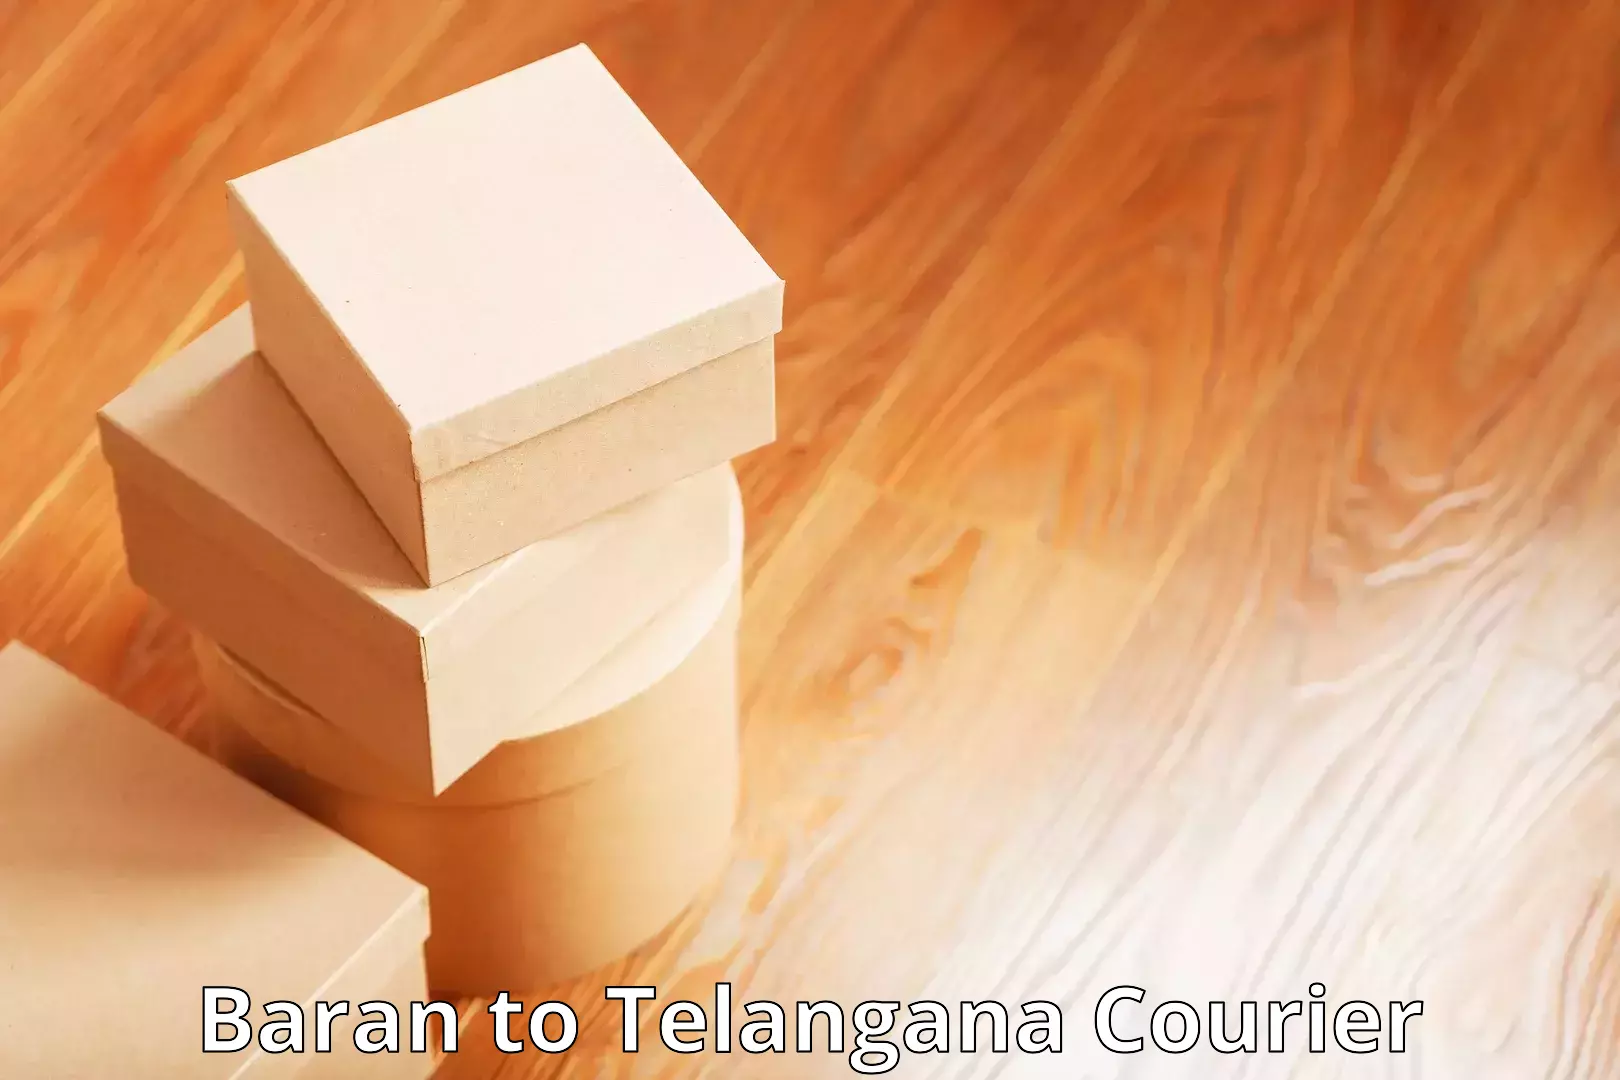 State-of-the-art courier technology Baran to Bejjanki